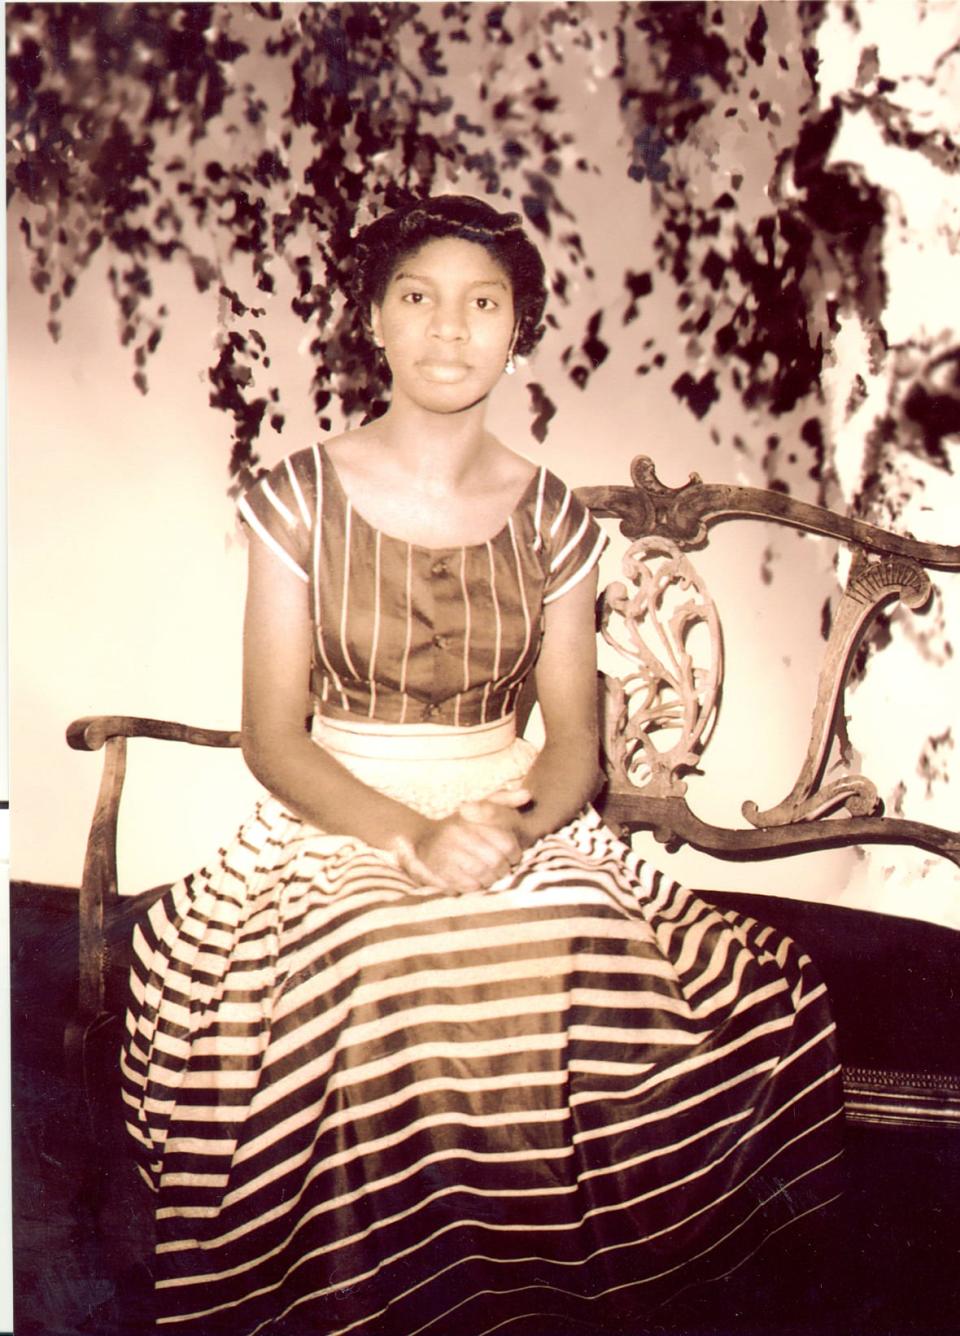 A portrait of a young Nina Simone. Venus Williams and others are raising funds to preserve the childhood home of the late singer and civil rights activist. (Photo courtesy The Nina Simone Project)<br>